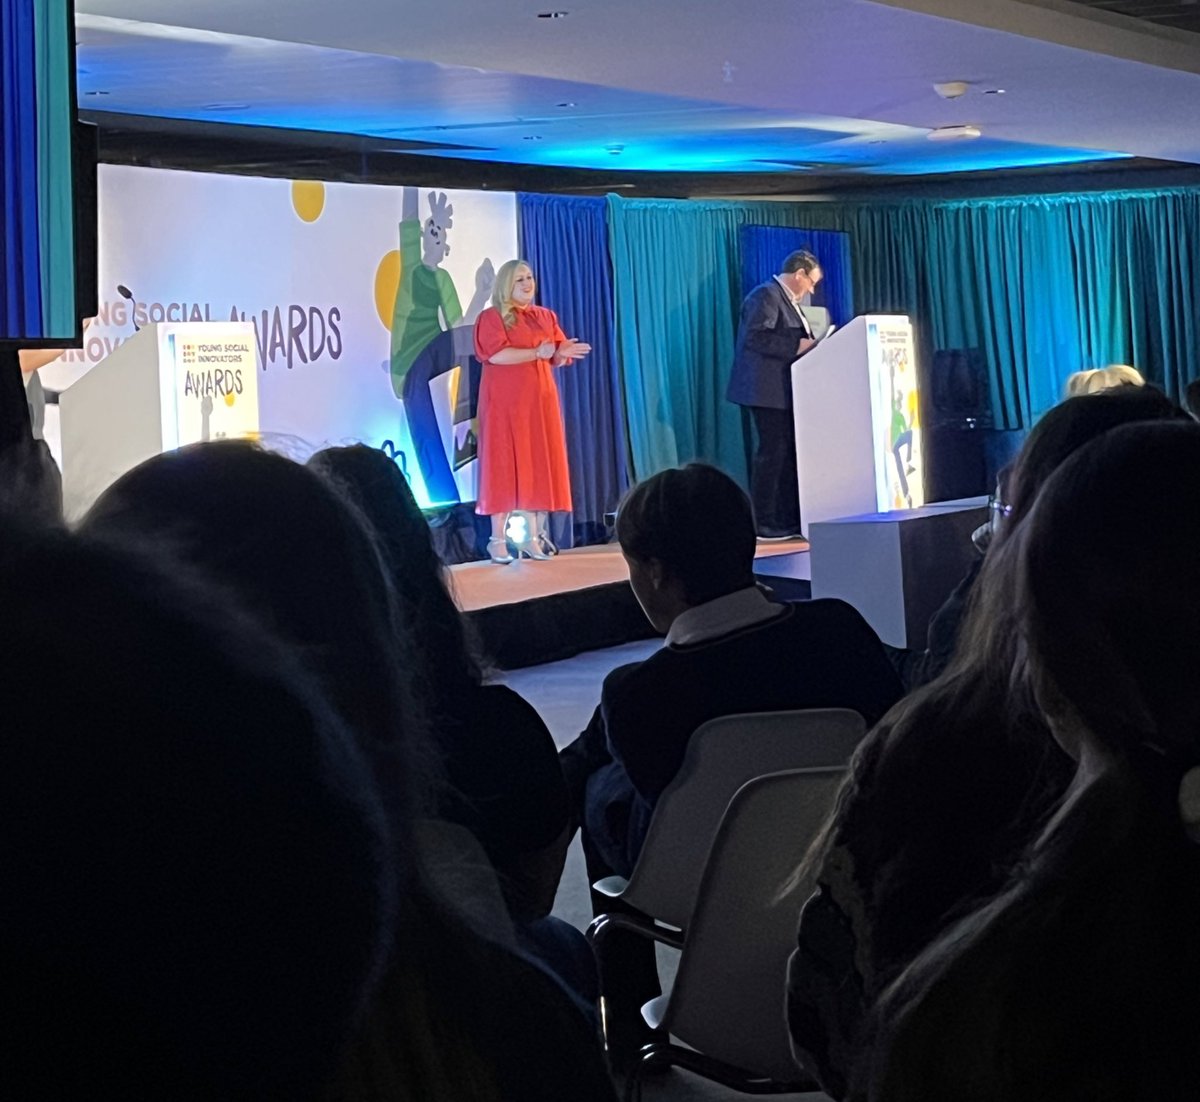 Congrats to all the awardees and the @YSInow team on their annual award ceremony held today @AVIVAStadium. The ingenuity and innovations by young people through their YSI projects is just phenomenal! We are so proud to have @YSInow as a @GaisceAward Challenge Partner 🙌👏